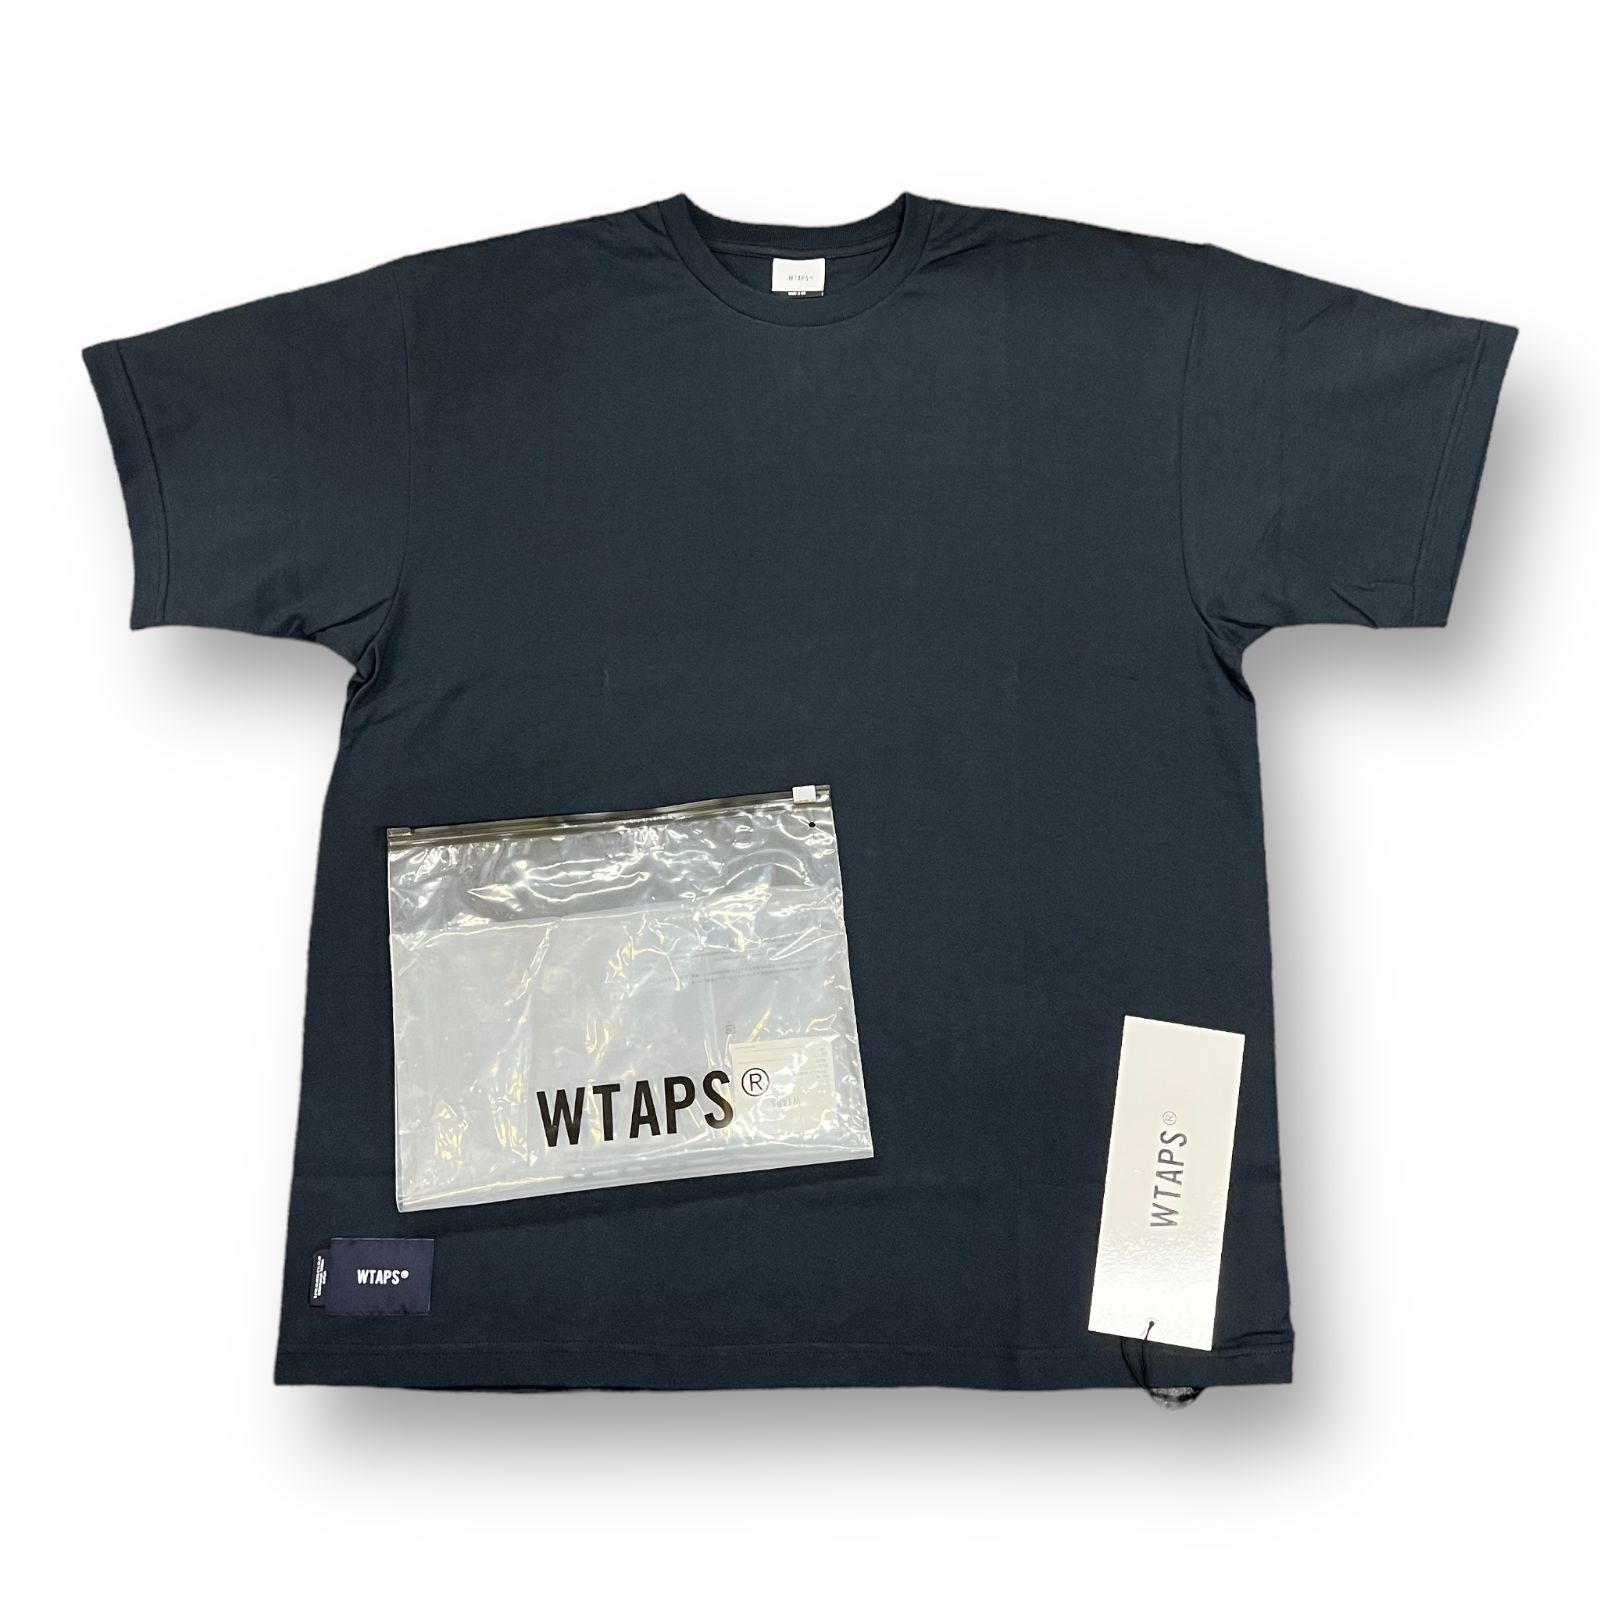 WTAPS 23ss INGREDIENTS SS COTTON Tシャツ M - Tシャツ/カットソー